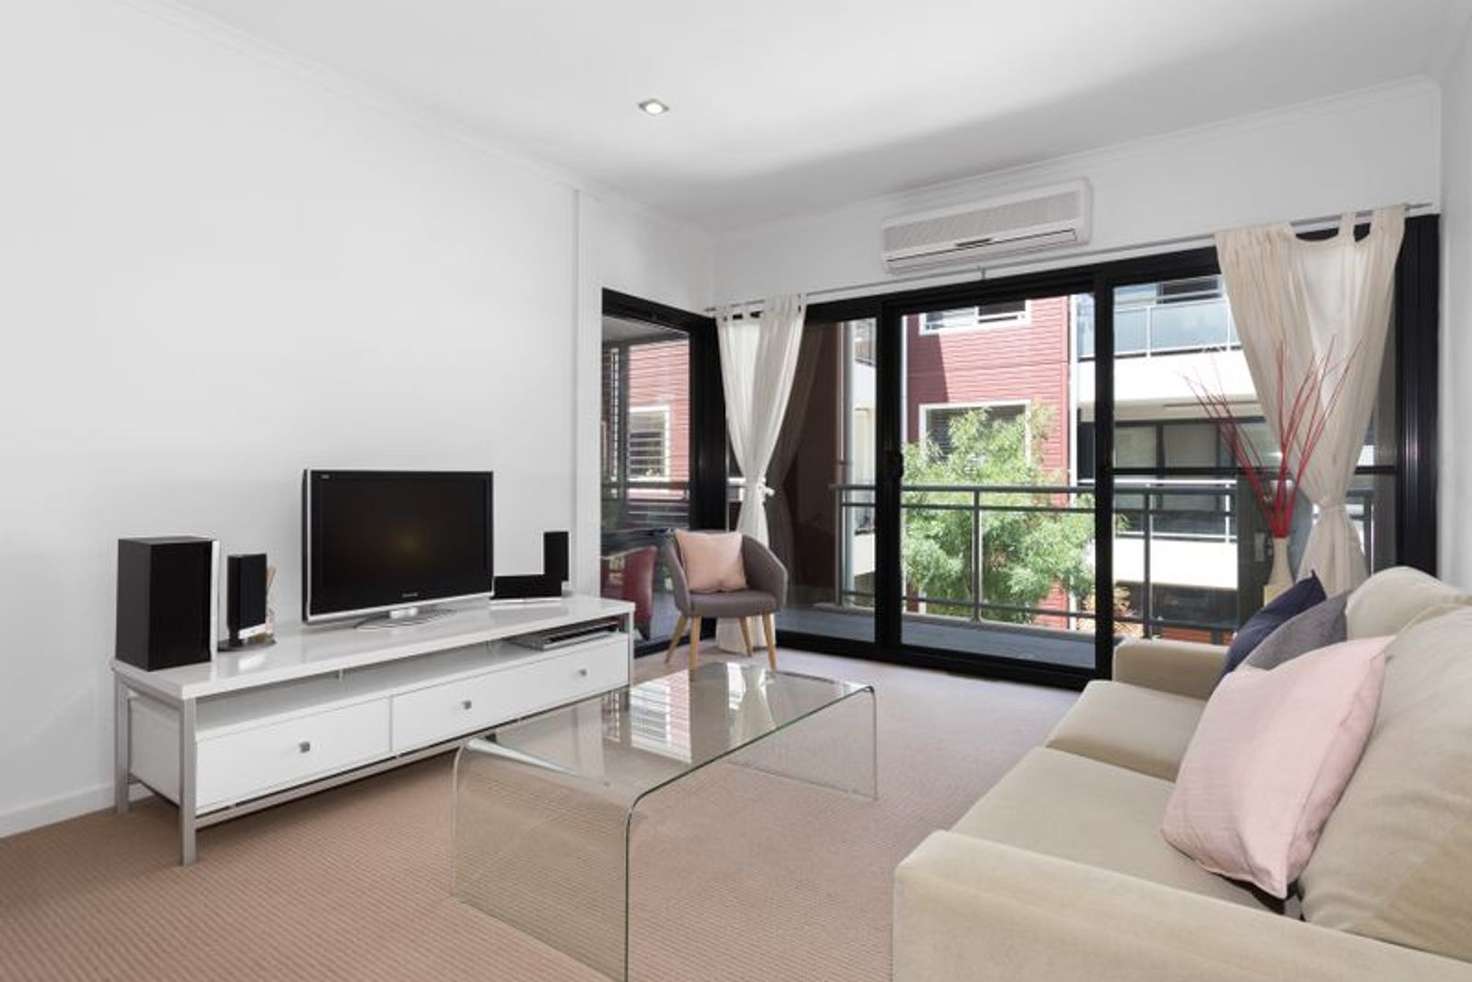 Main view of Homely apartment listing, 17/474 Murray Street, Perth WA 6000